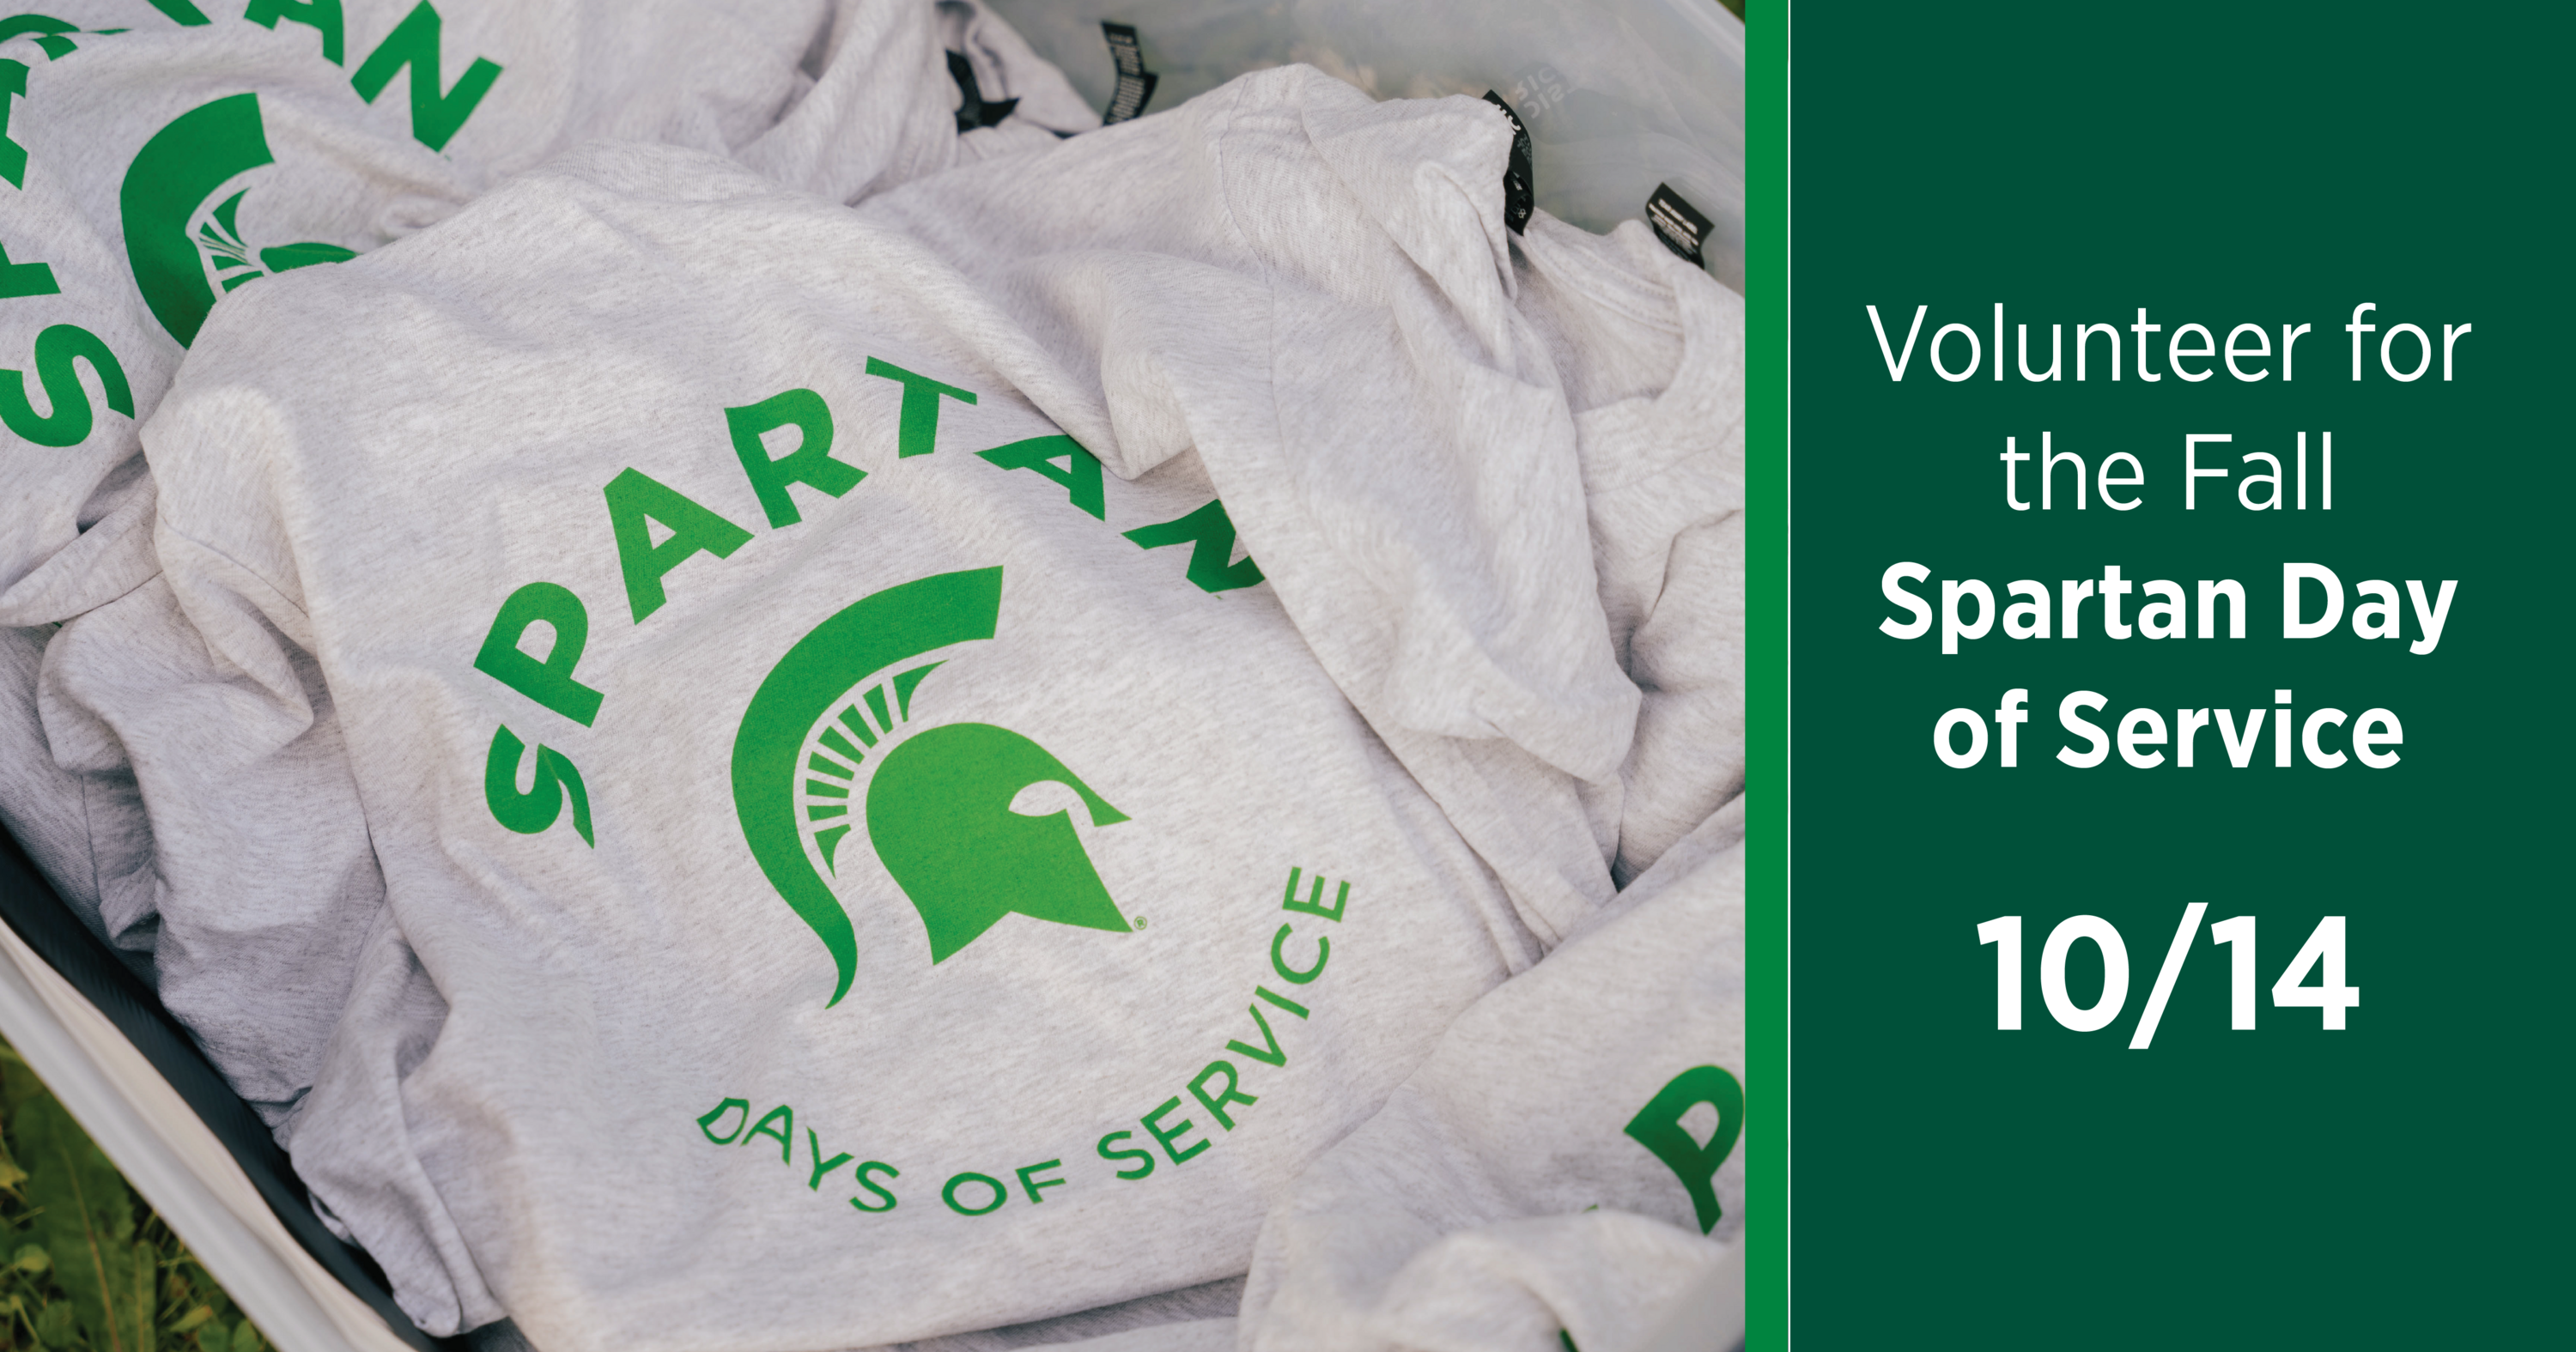 A pile of white t-shirts with the words Spartan Days of Service on them, next to a dark green box reading Volunteer for the Fall Spartan Day of Service 10/14